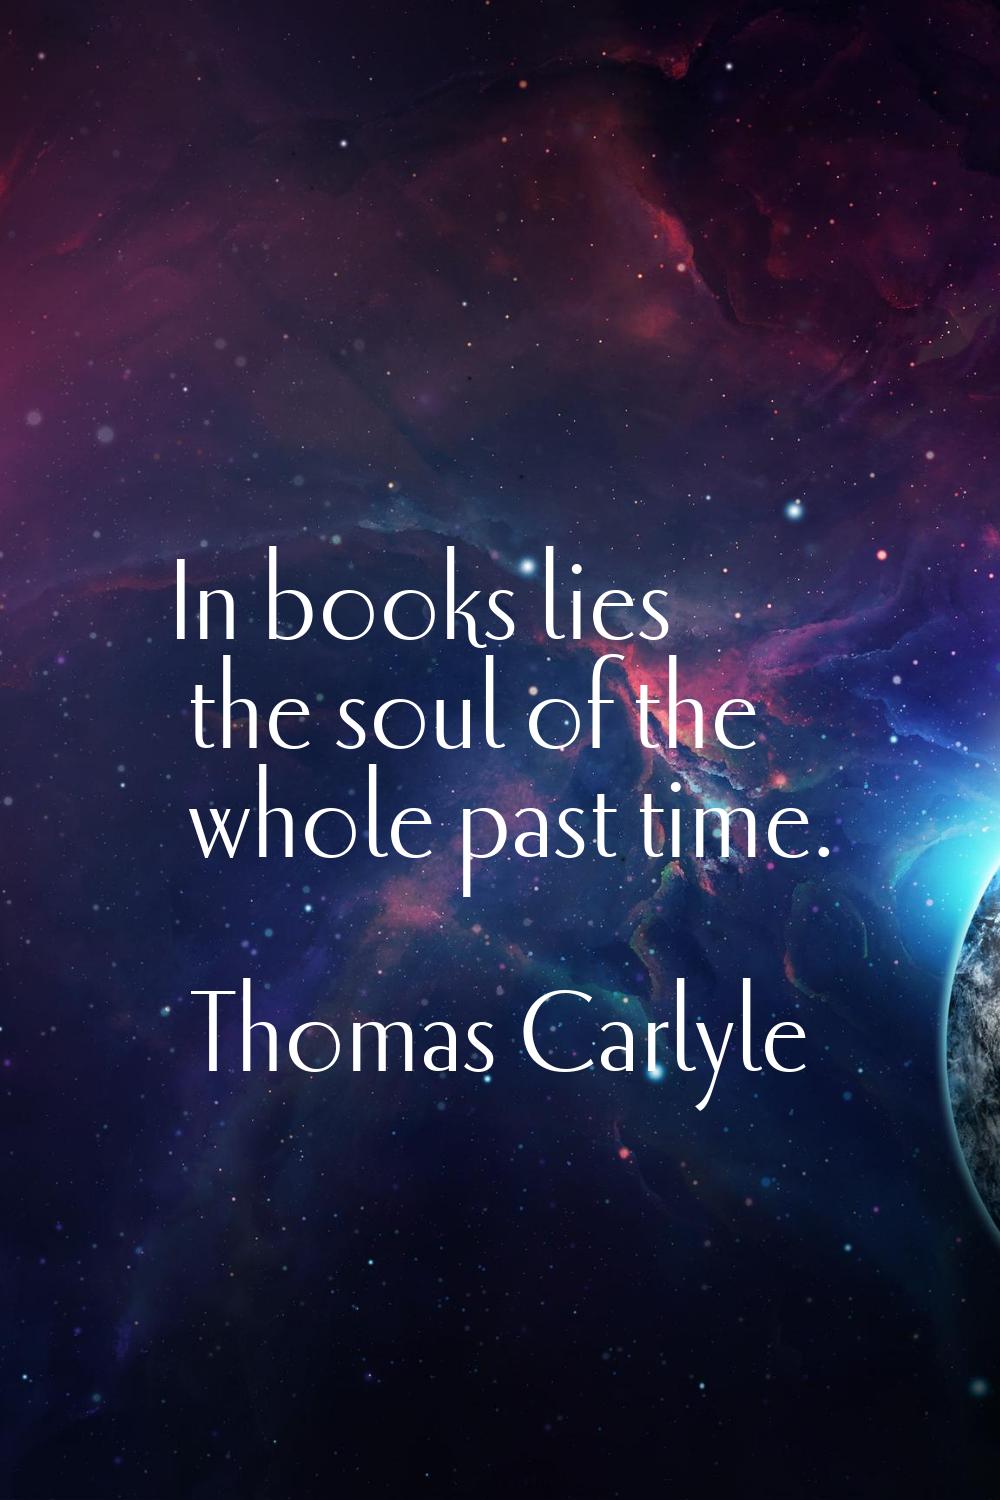 In books lies the soul of the whole past time.